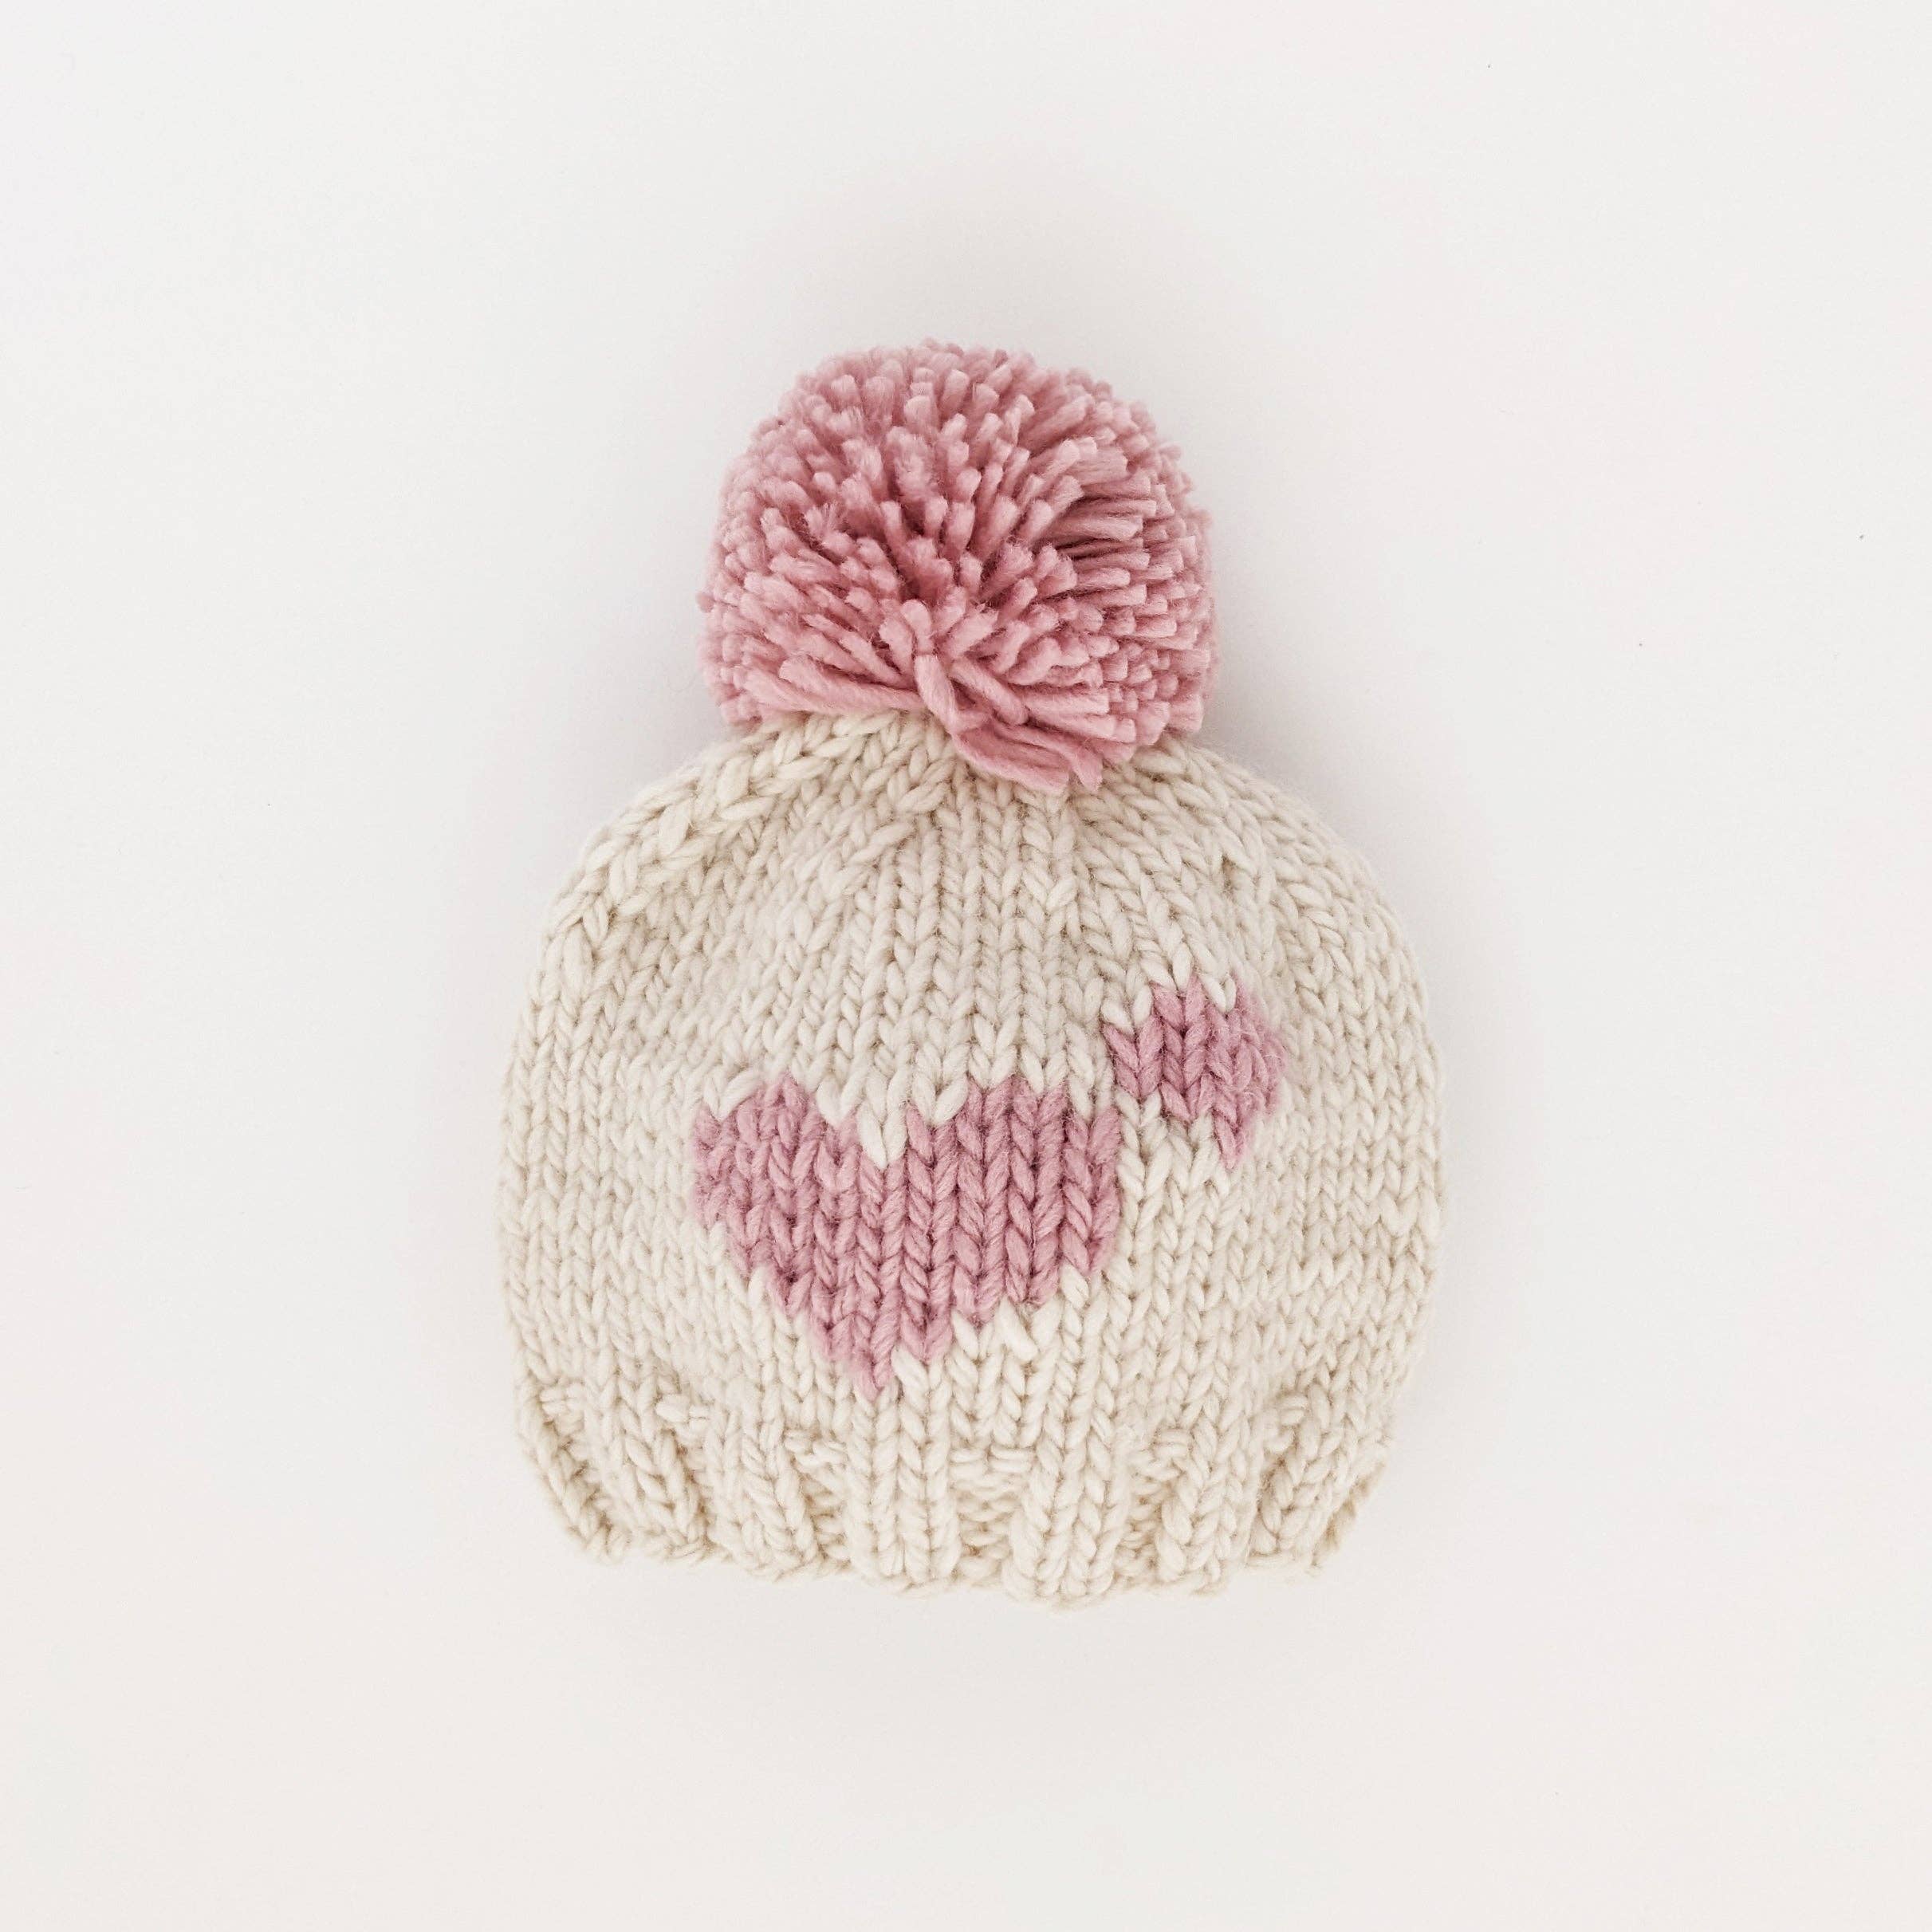 Huggalugs - Sweetheart Knit Beanie Hat Rosy: S (0-6 months)